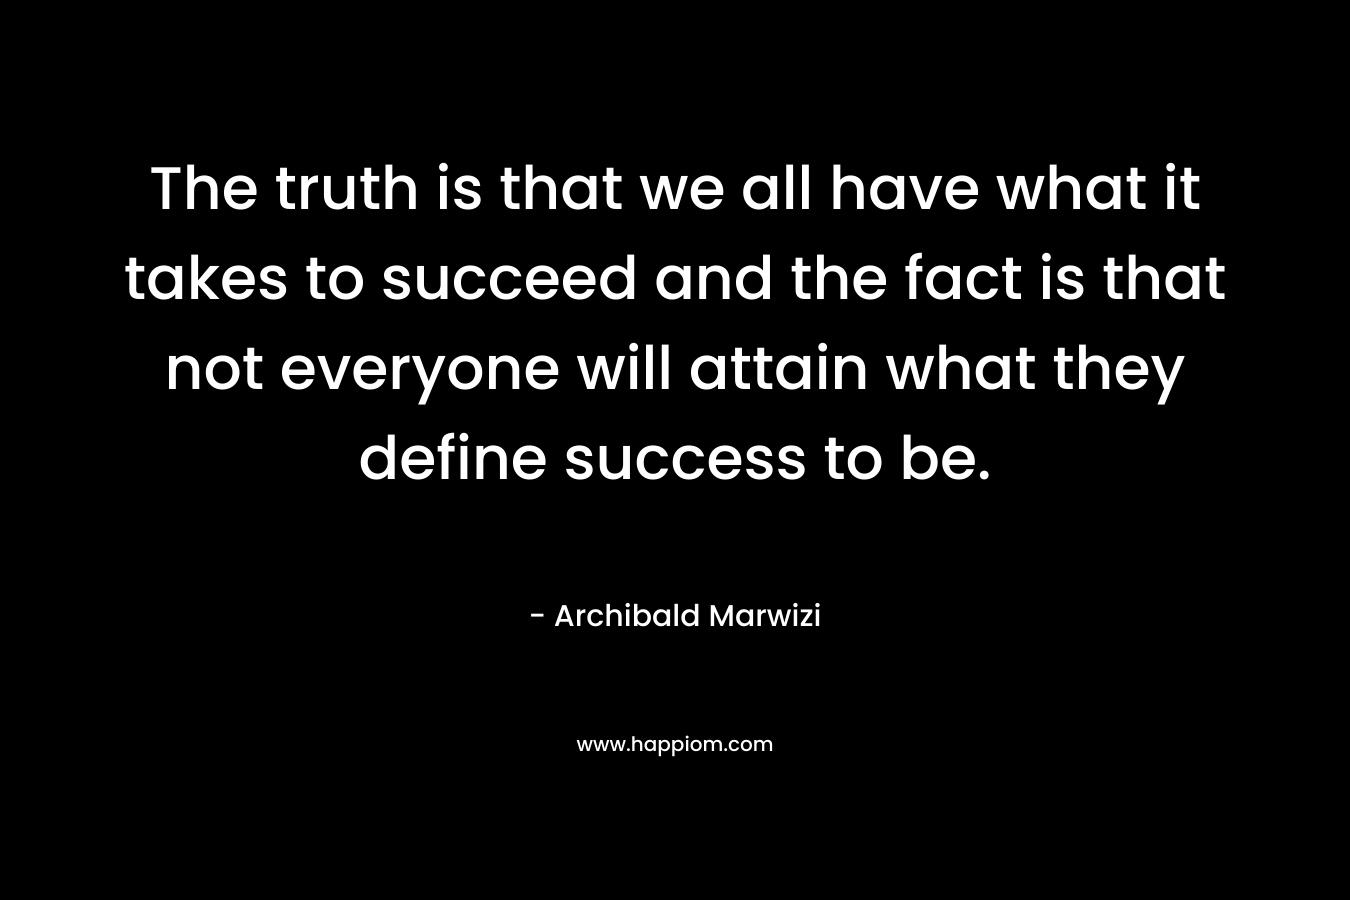 The truth is that we all have what it takes to succeed and the fact is that not everyone will attain what they define success to be.